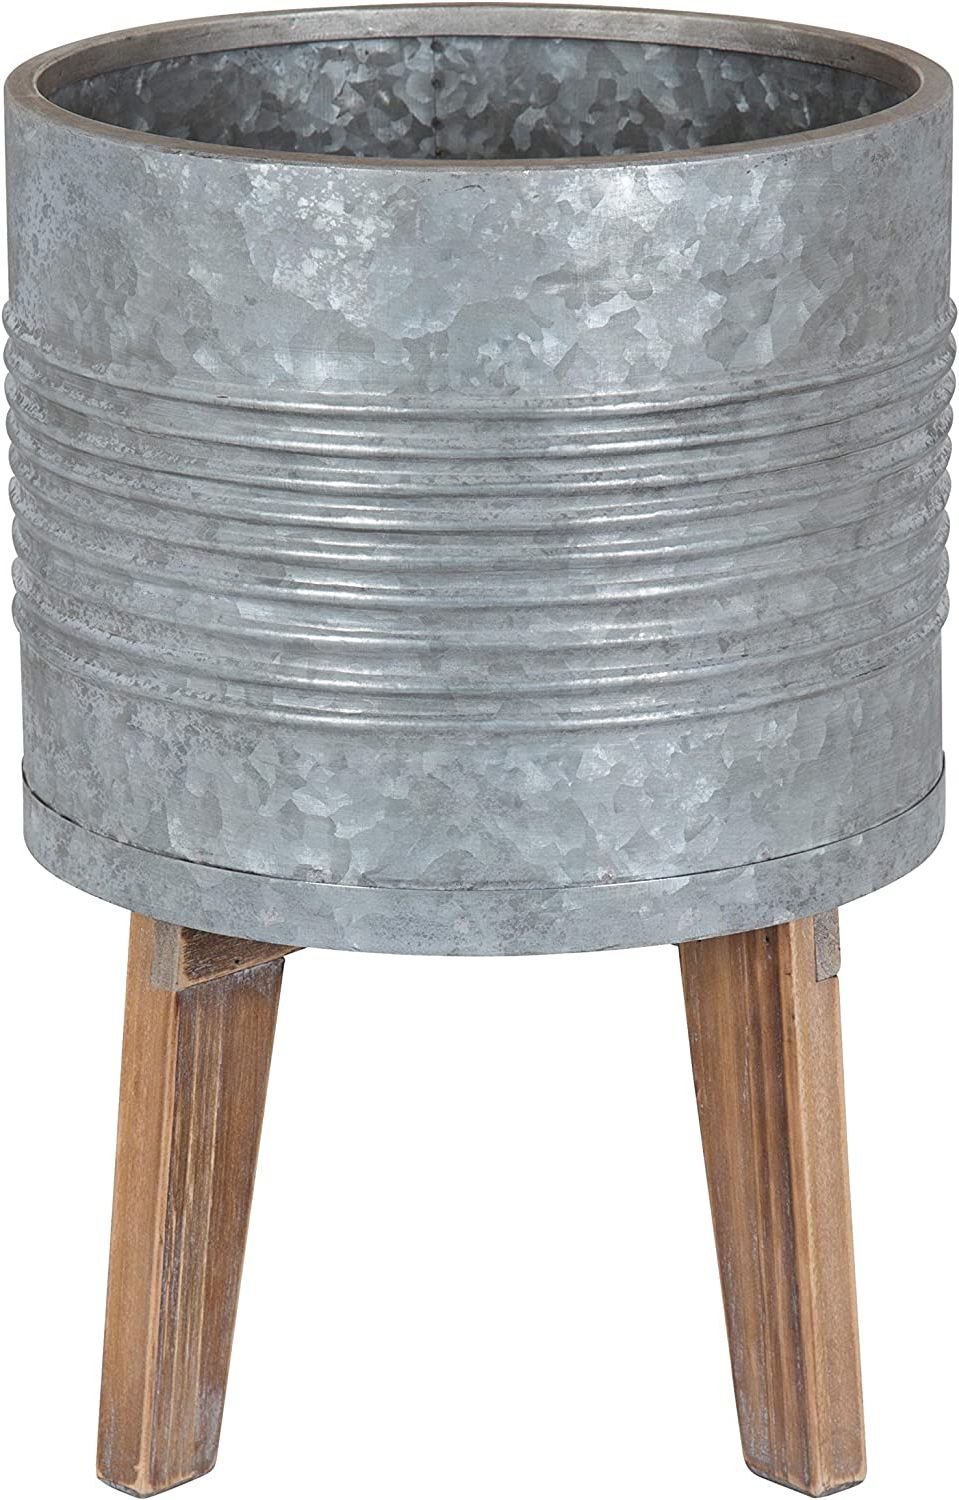 Bracey Garden Stools Pertaining To Latest Kate And Laurel Gavri Casual Farmhouse Galvanized Metal Planter With Rustic  Wood Stand (View 23 of 30)